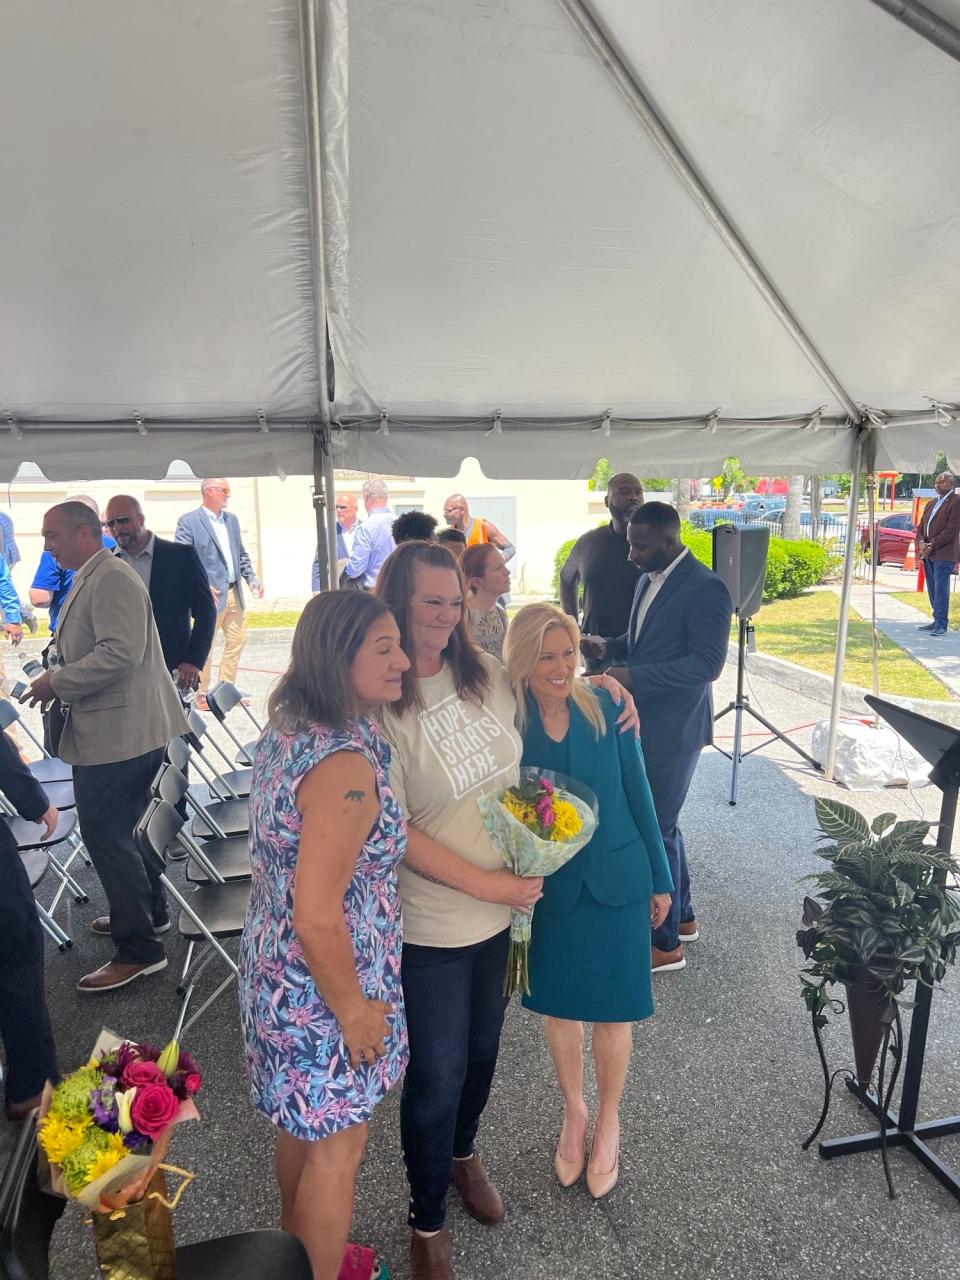 Ready2Work graduate Leigh Ann Bohrer, center, receives congratulatory hugs from Mayor Donna Deegan, right, and an unidentified woman at a recent graduation ceremony for the Operation New Hope program for ex-offenders.